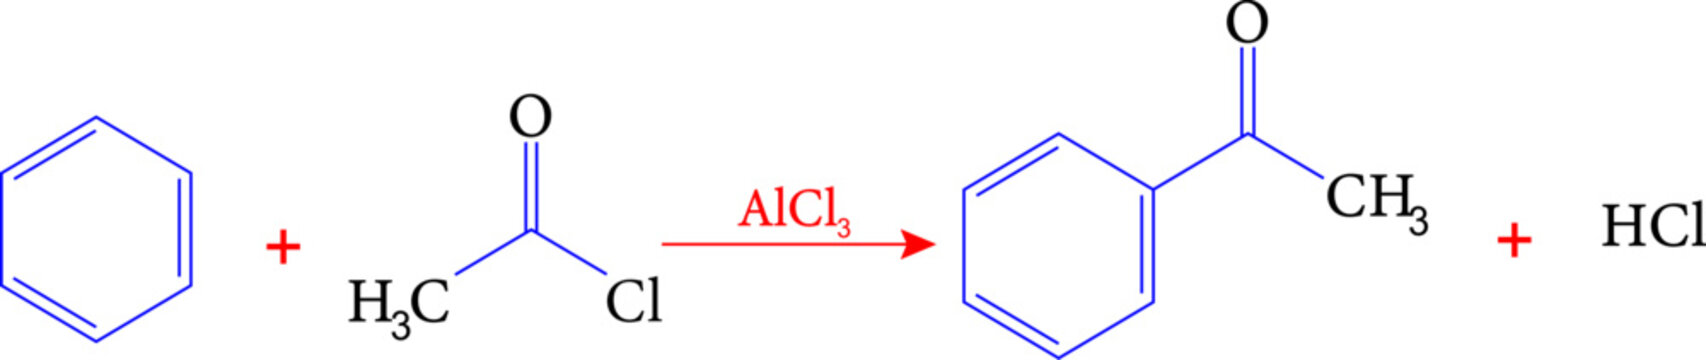 Friedel-Crafts acylation of benzene by acetyl chloride . Vector illustration